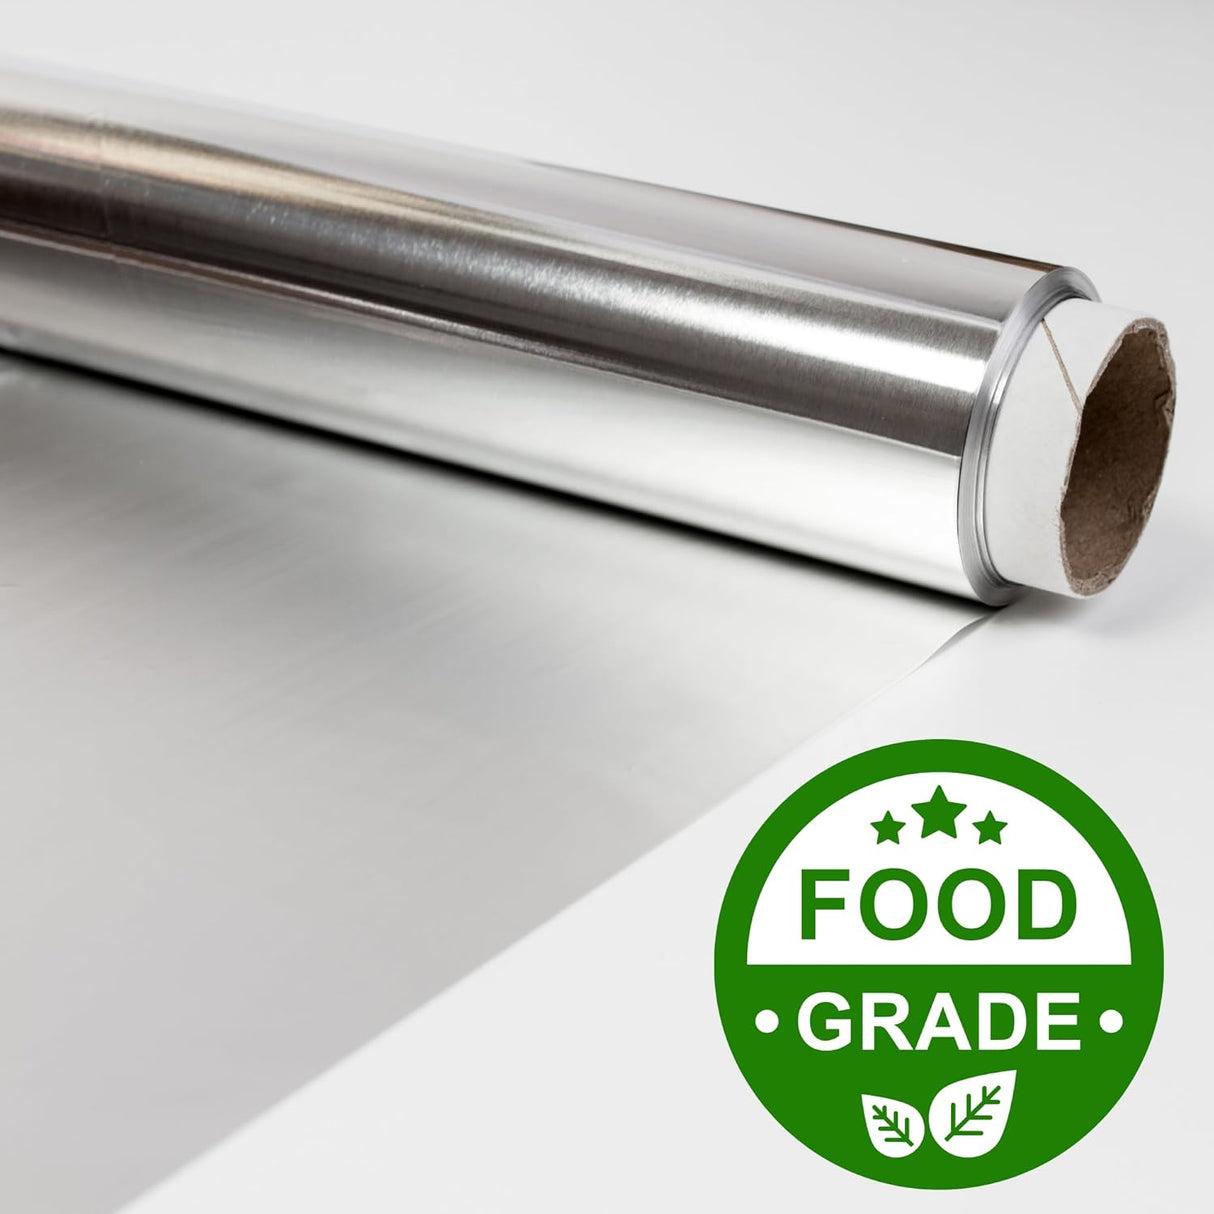 Singhal Aluminum Foil 72 Meters, 11microns | Aluminium Silver Foil for Kitchen, Food Packing, Wrapping, Storing and Serving (18 Mtr x Pack of 4)